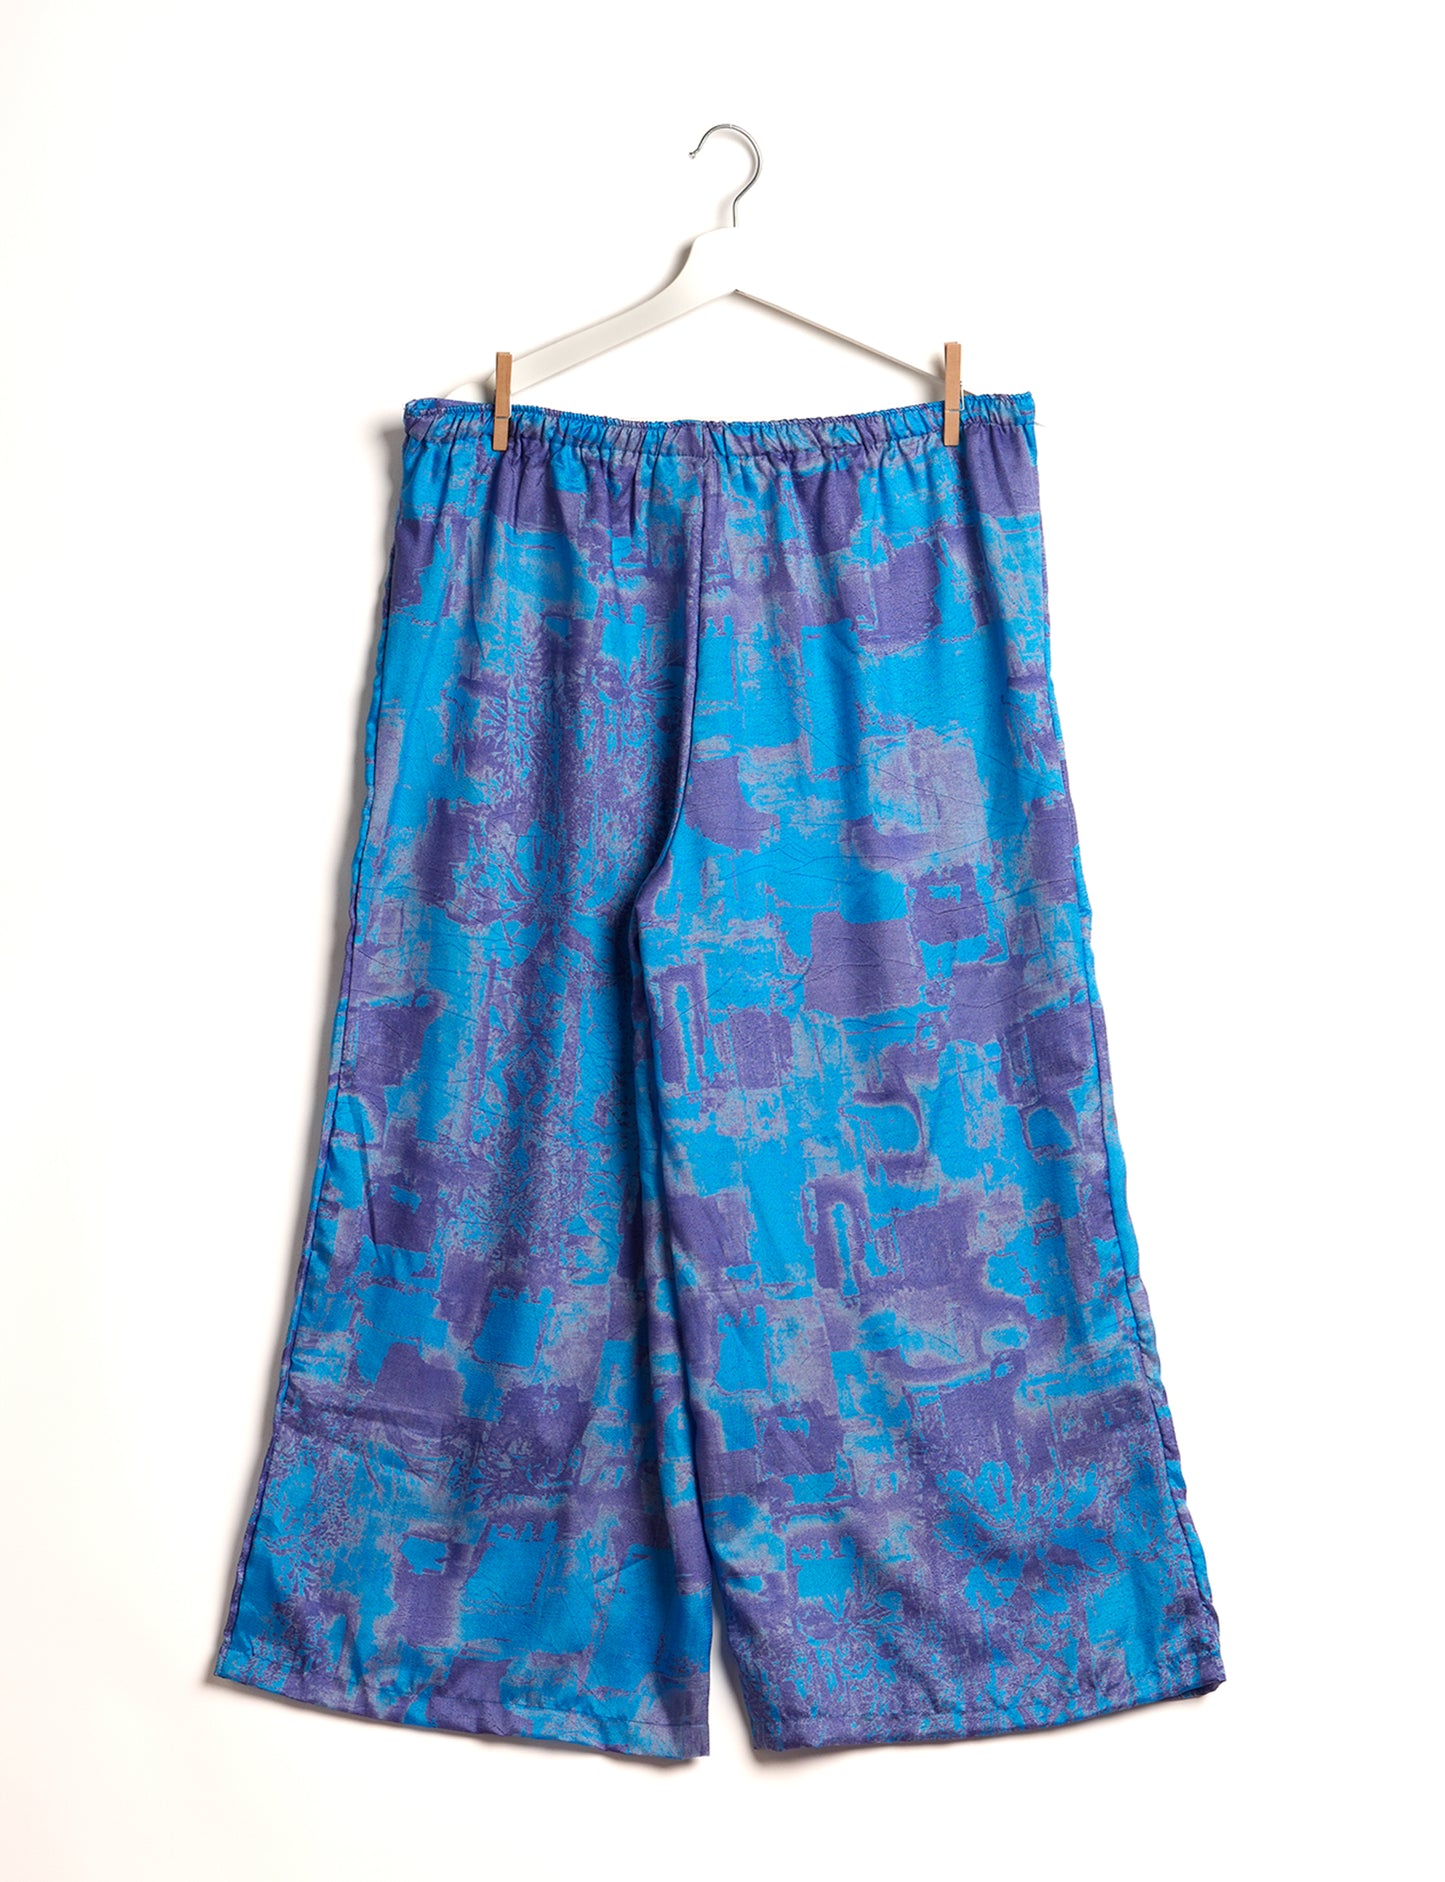 Step into sustainable fashion with our Palazzo Pants – a harmonious blend of Indian and Italian influences. These wide-legged pants, made from upcycled saris, offer comfort with an all-around elastic waist and a stylish flared leg. Make a statement with eco-friendly, chic palazzo pants that redefine ethical clothing.